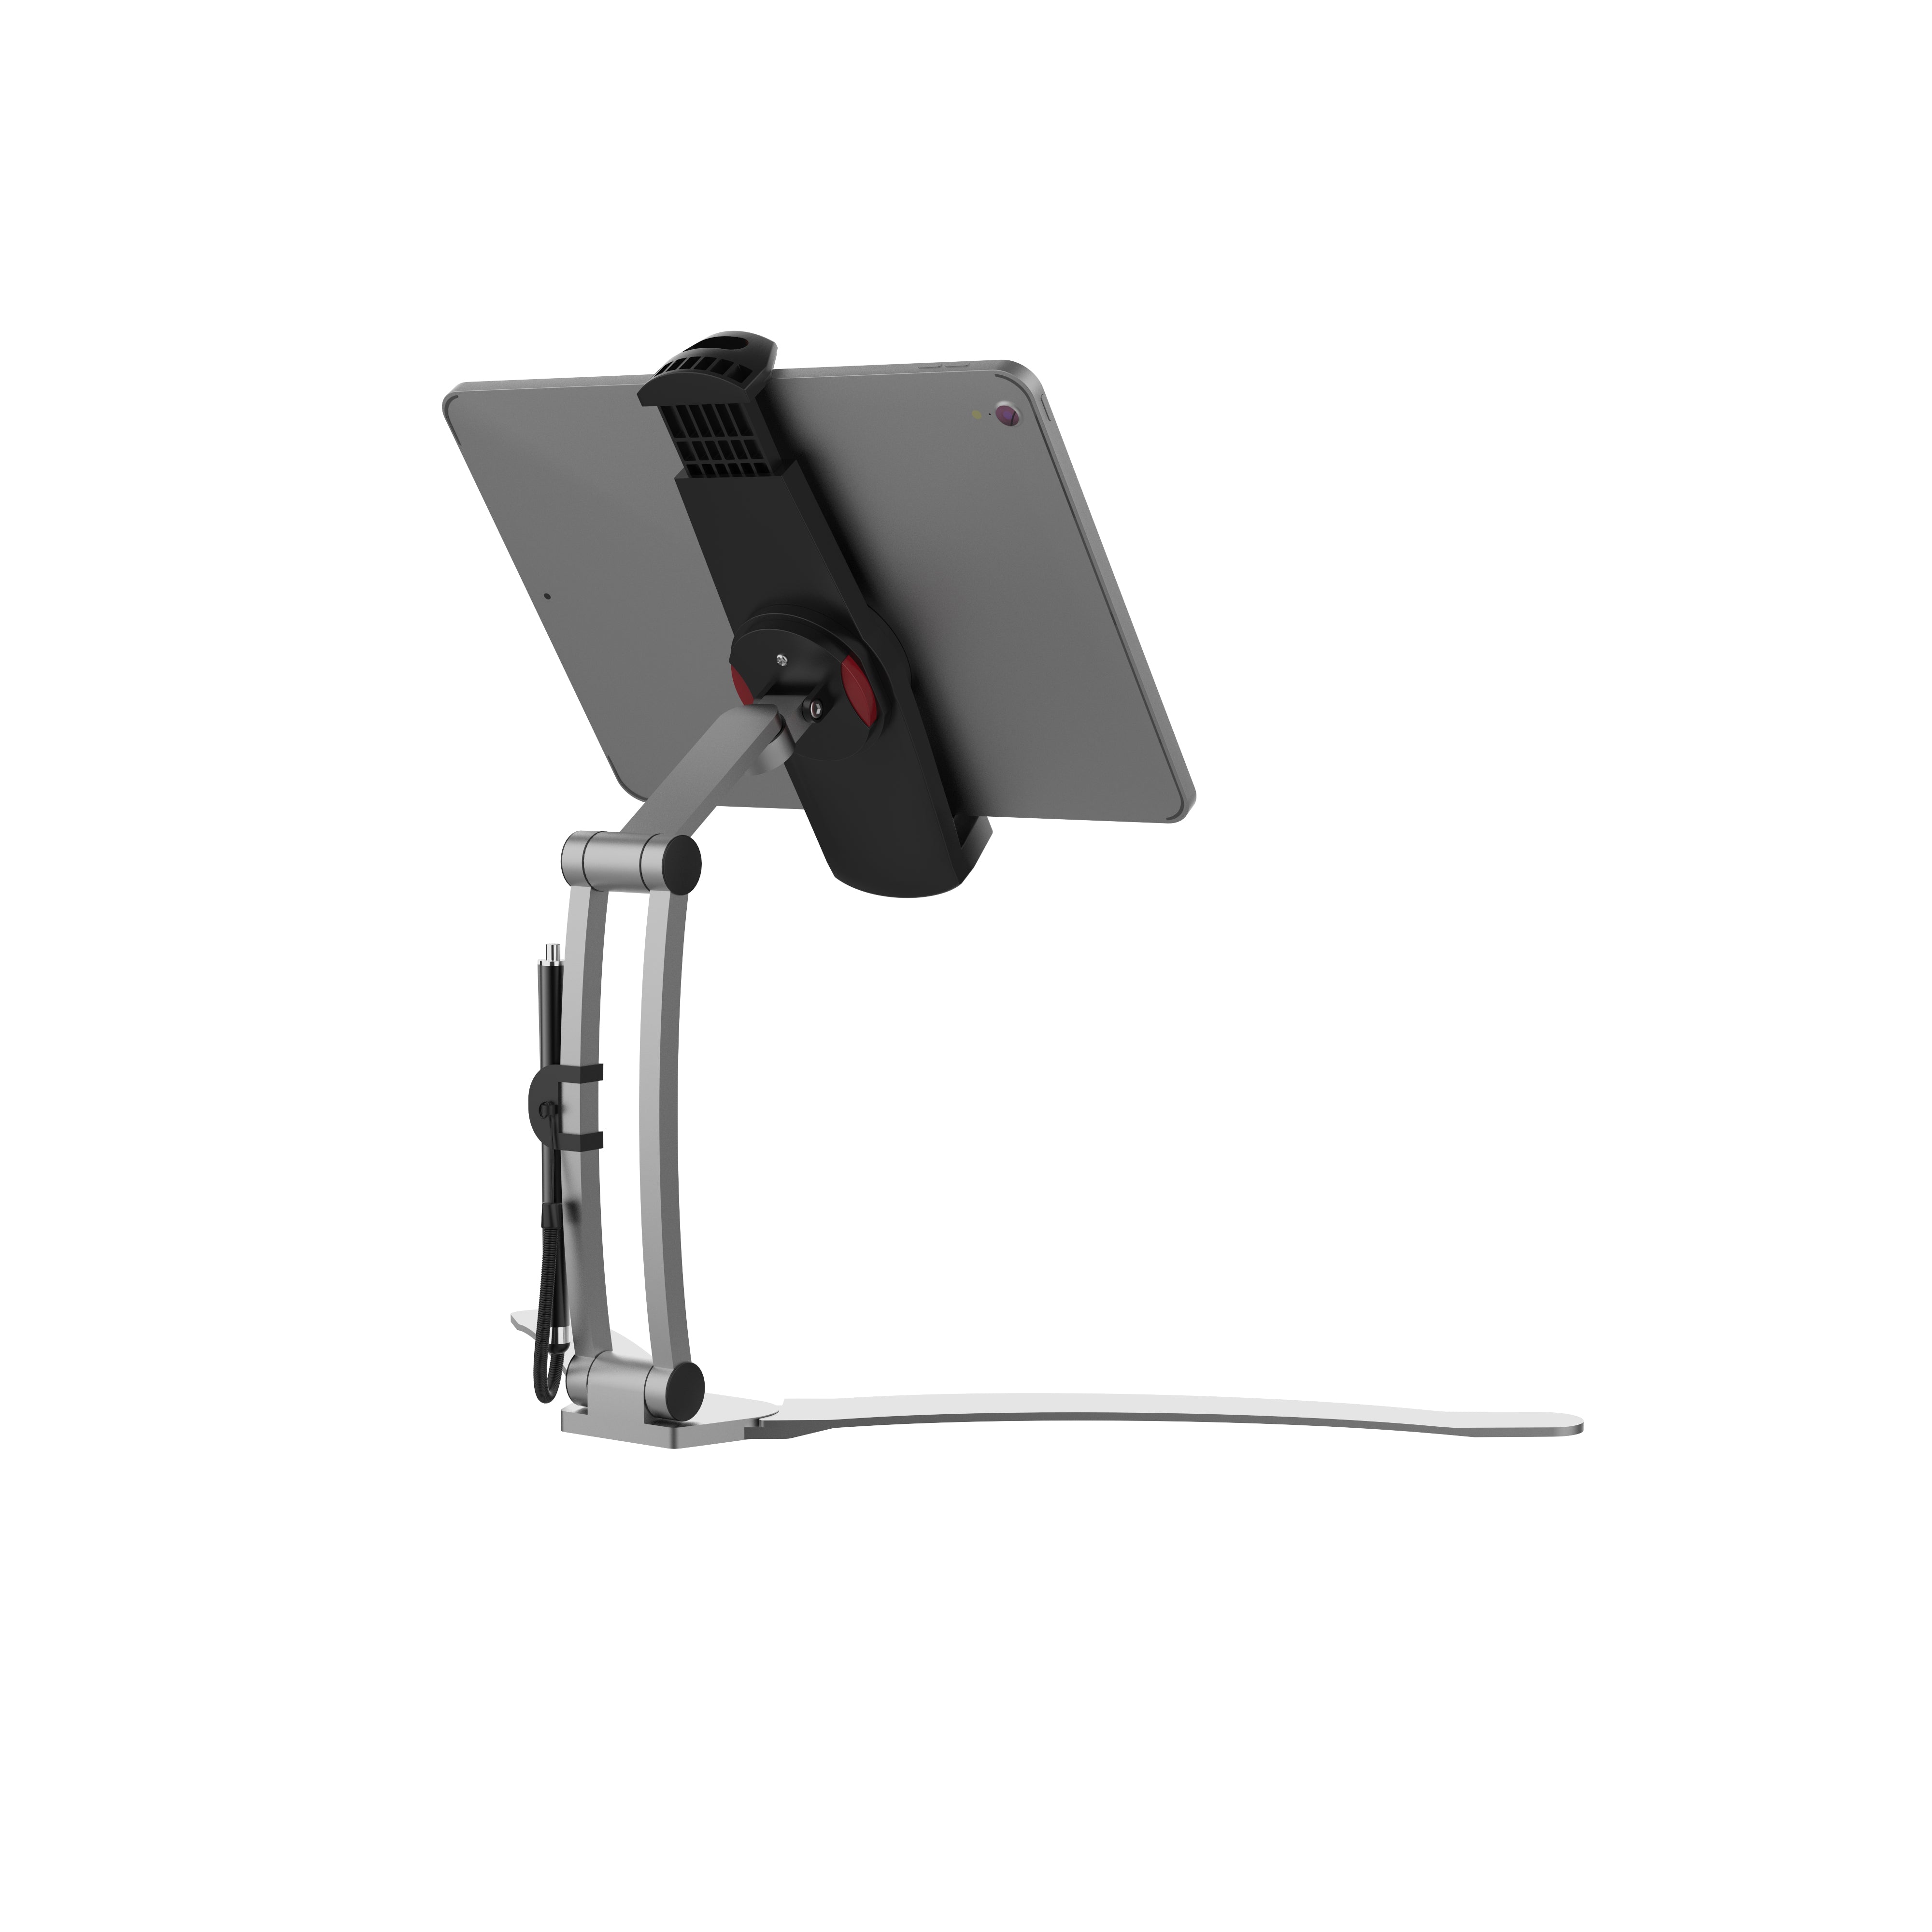 Multi-Flex Tablet Stand and Mount for 7-13 Inch Tablets, including iPad 10.2-inch (7th/ 8th/ 9th Generation)